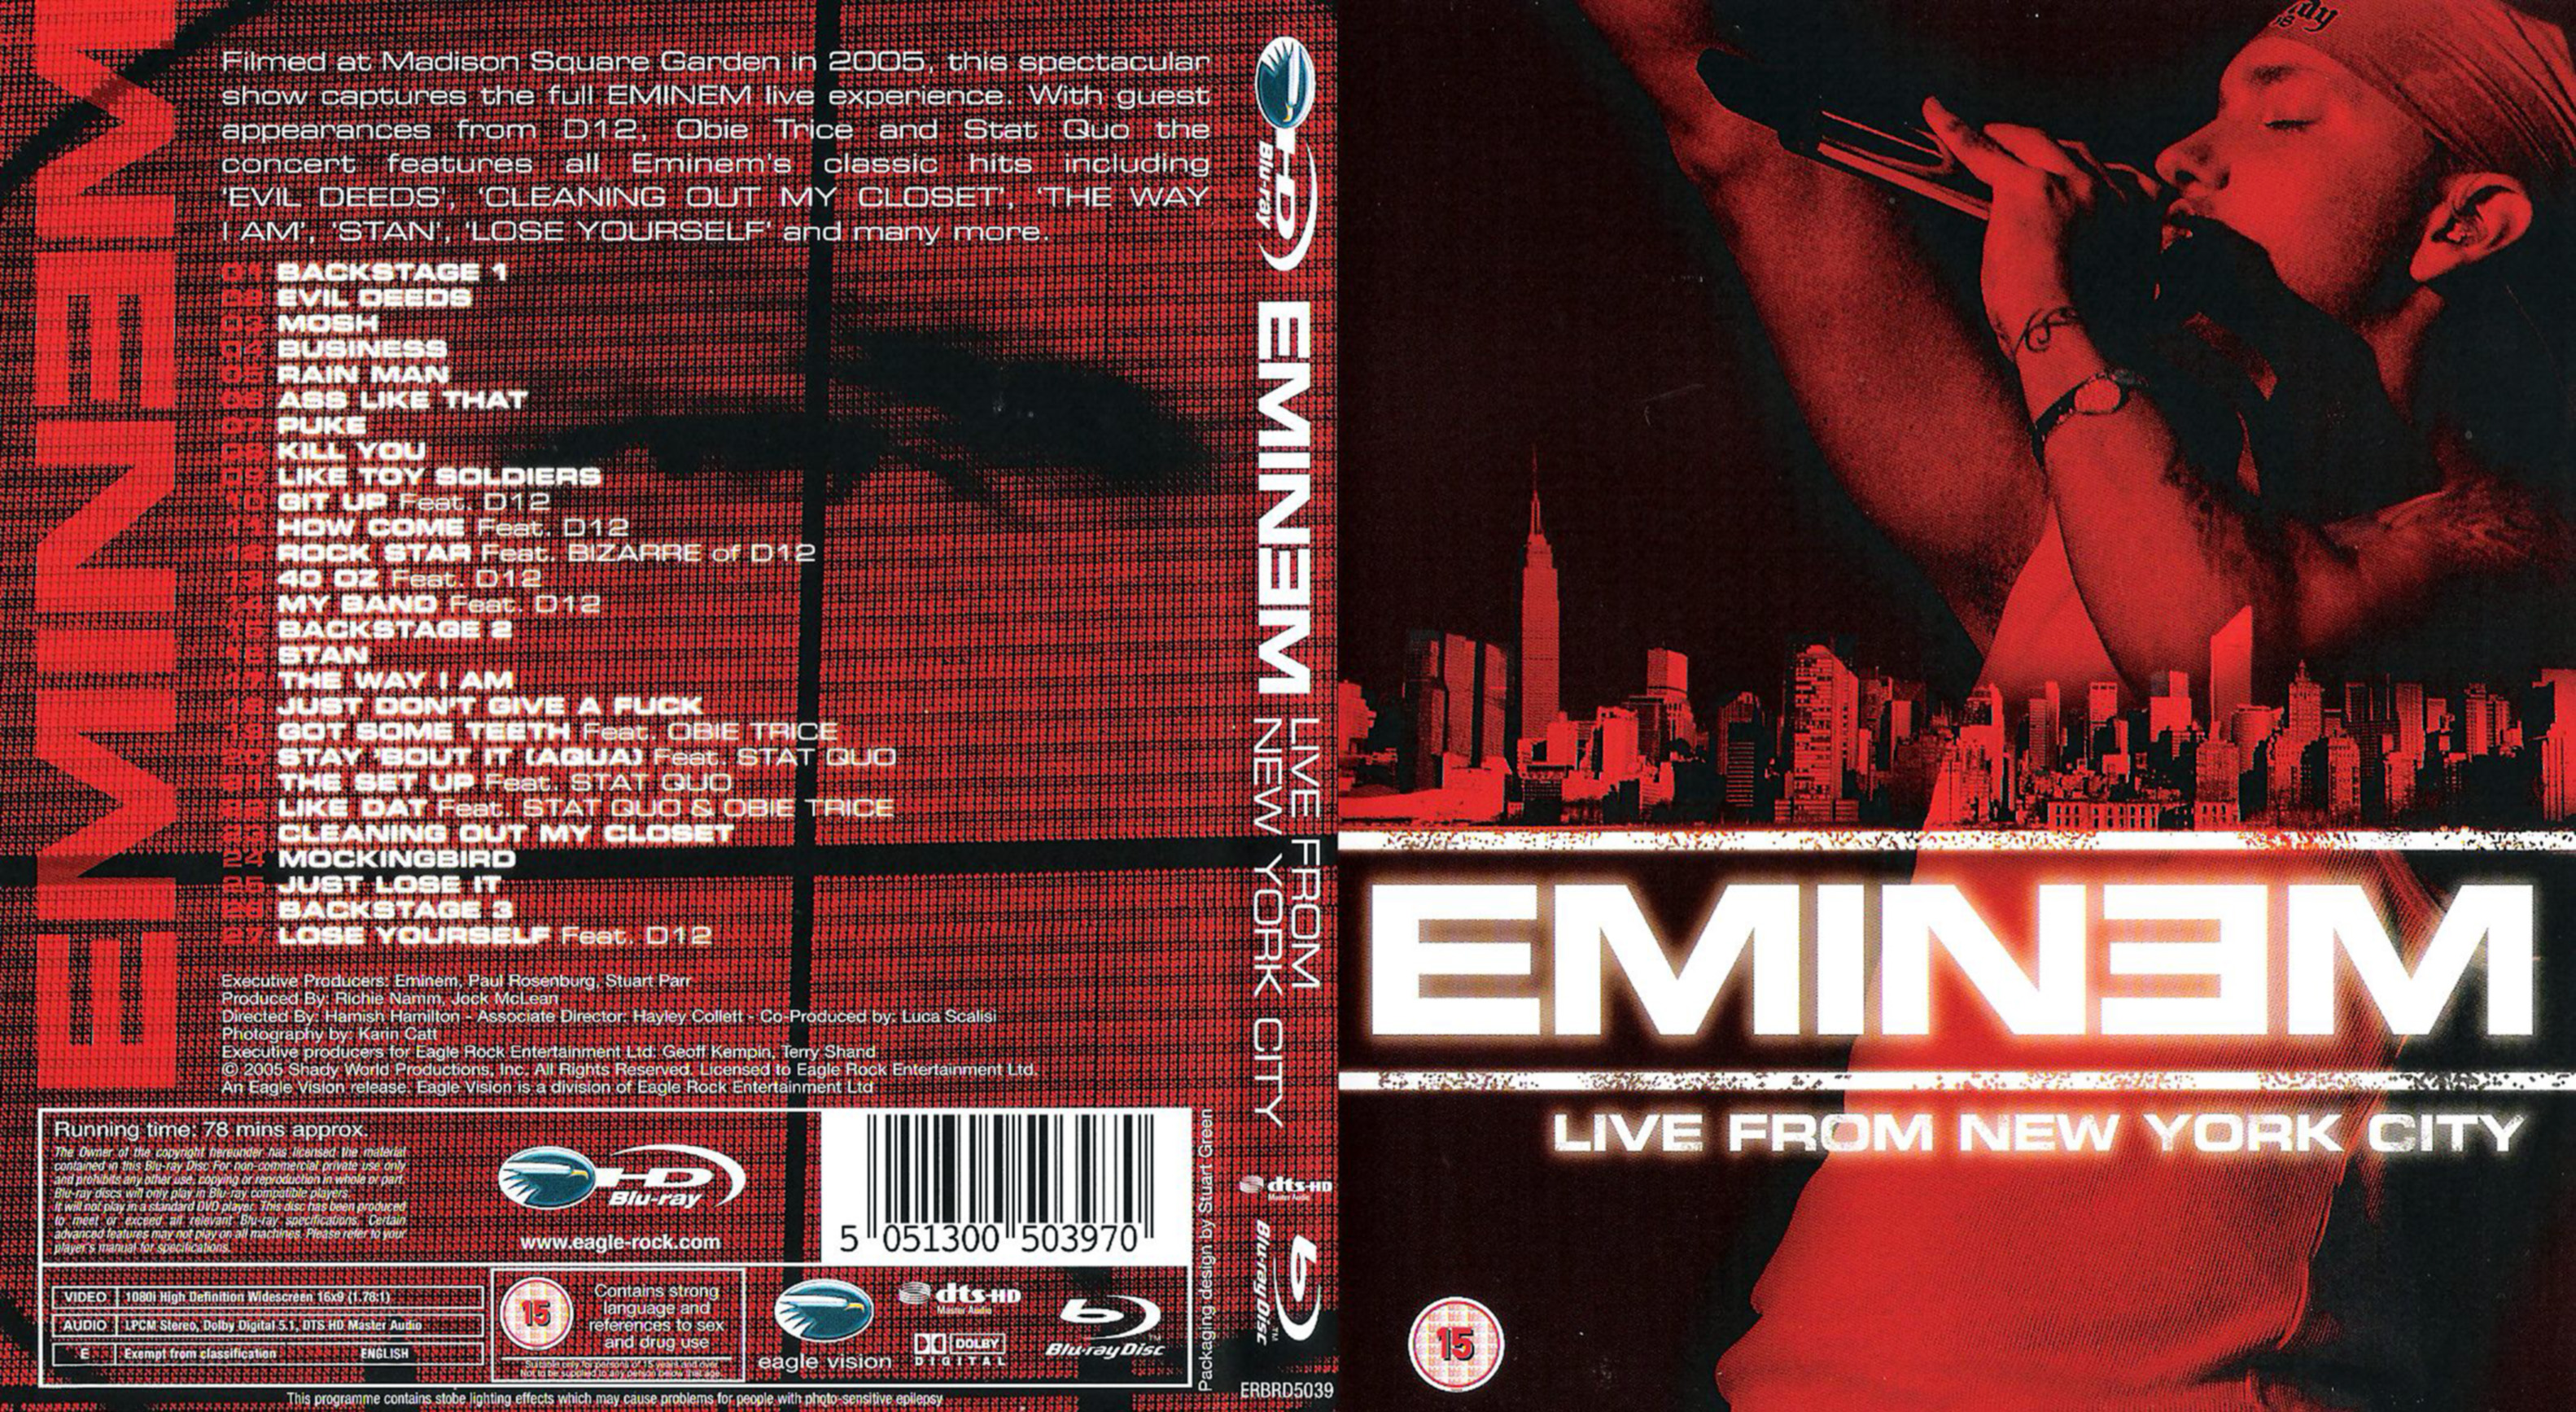 Jaquette DVD Eminem - Live from new york city 2005 (BLU-RAY)